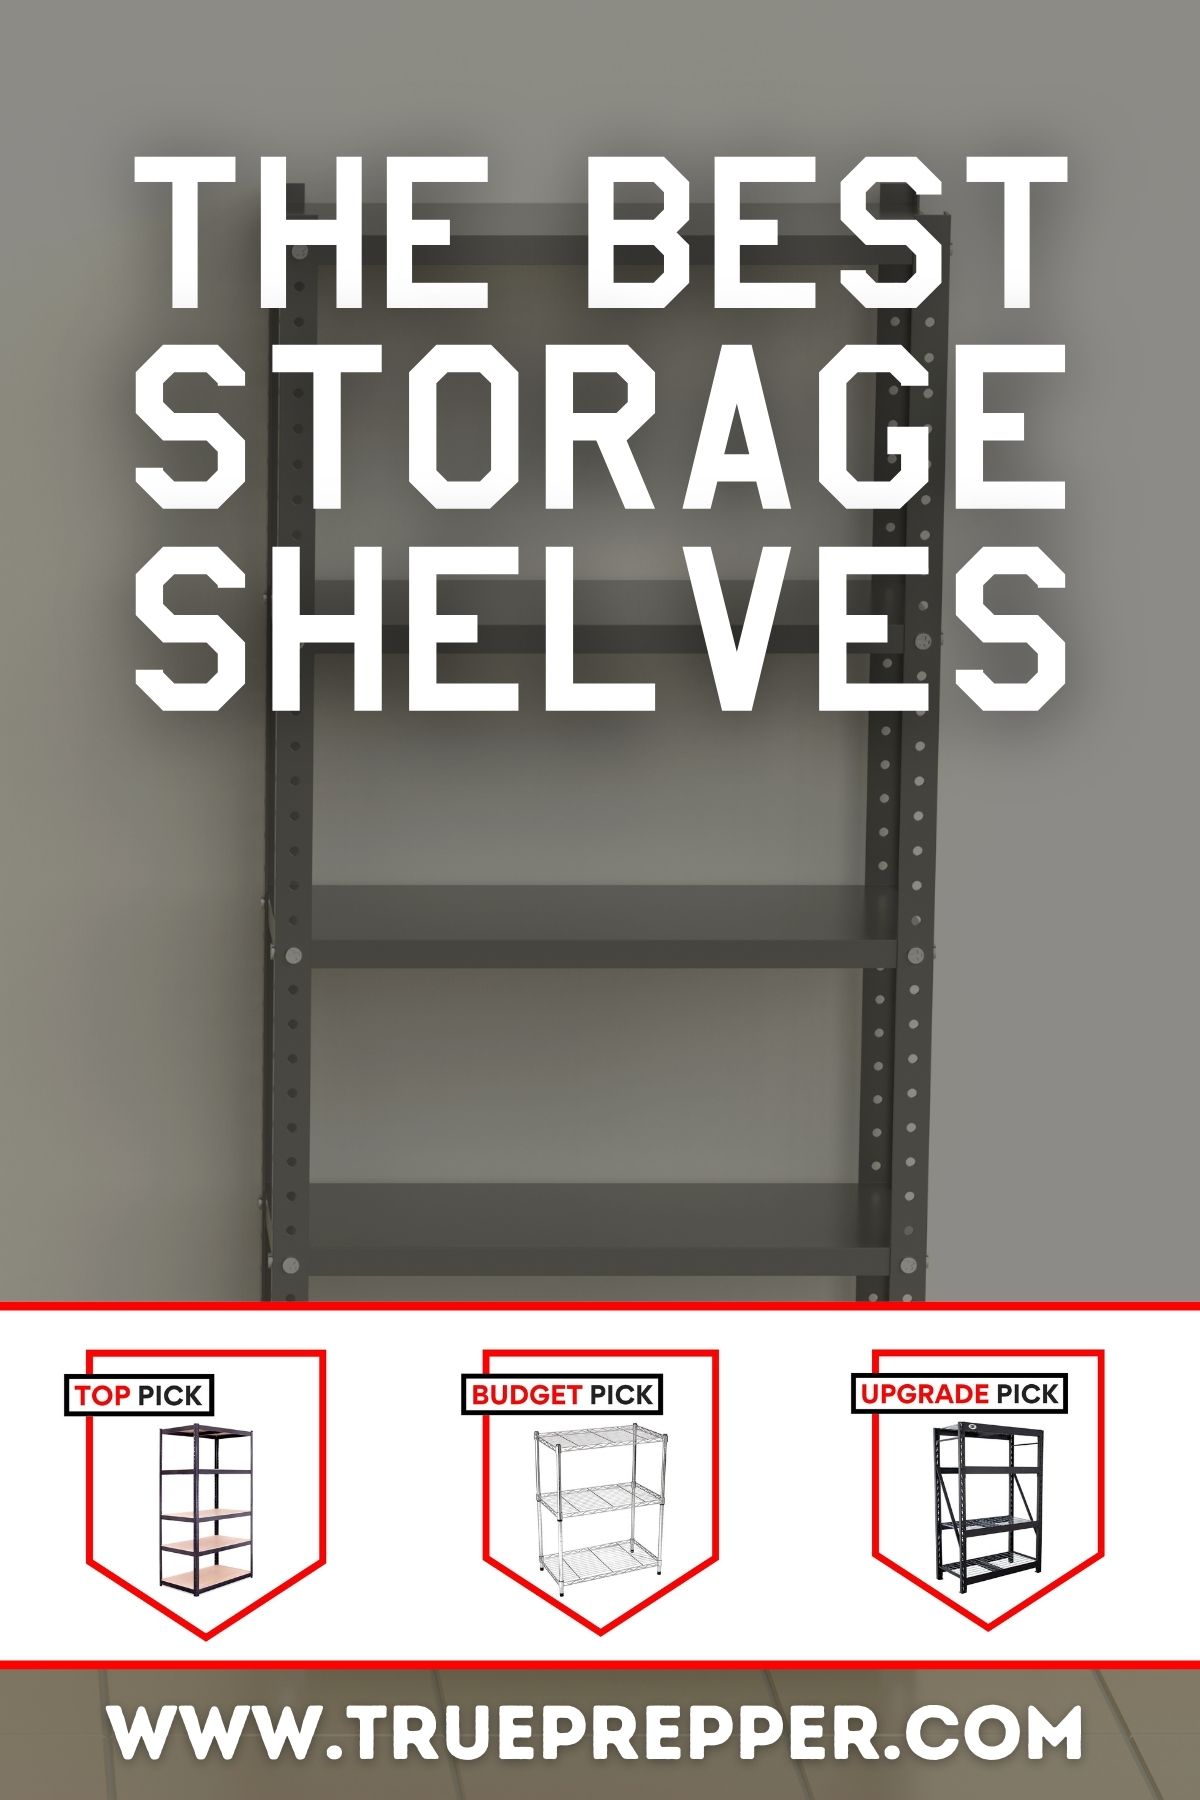 The Best Storage Shelves for Food Supplies and Prepper Gear